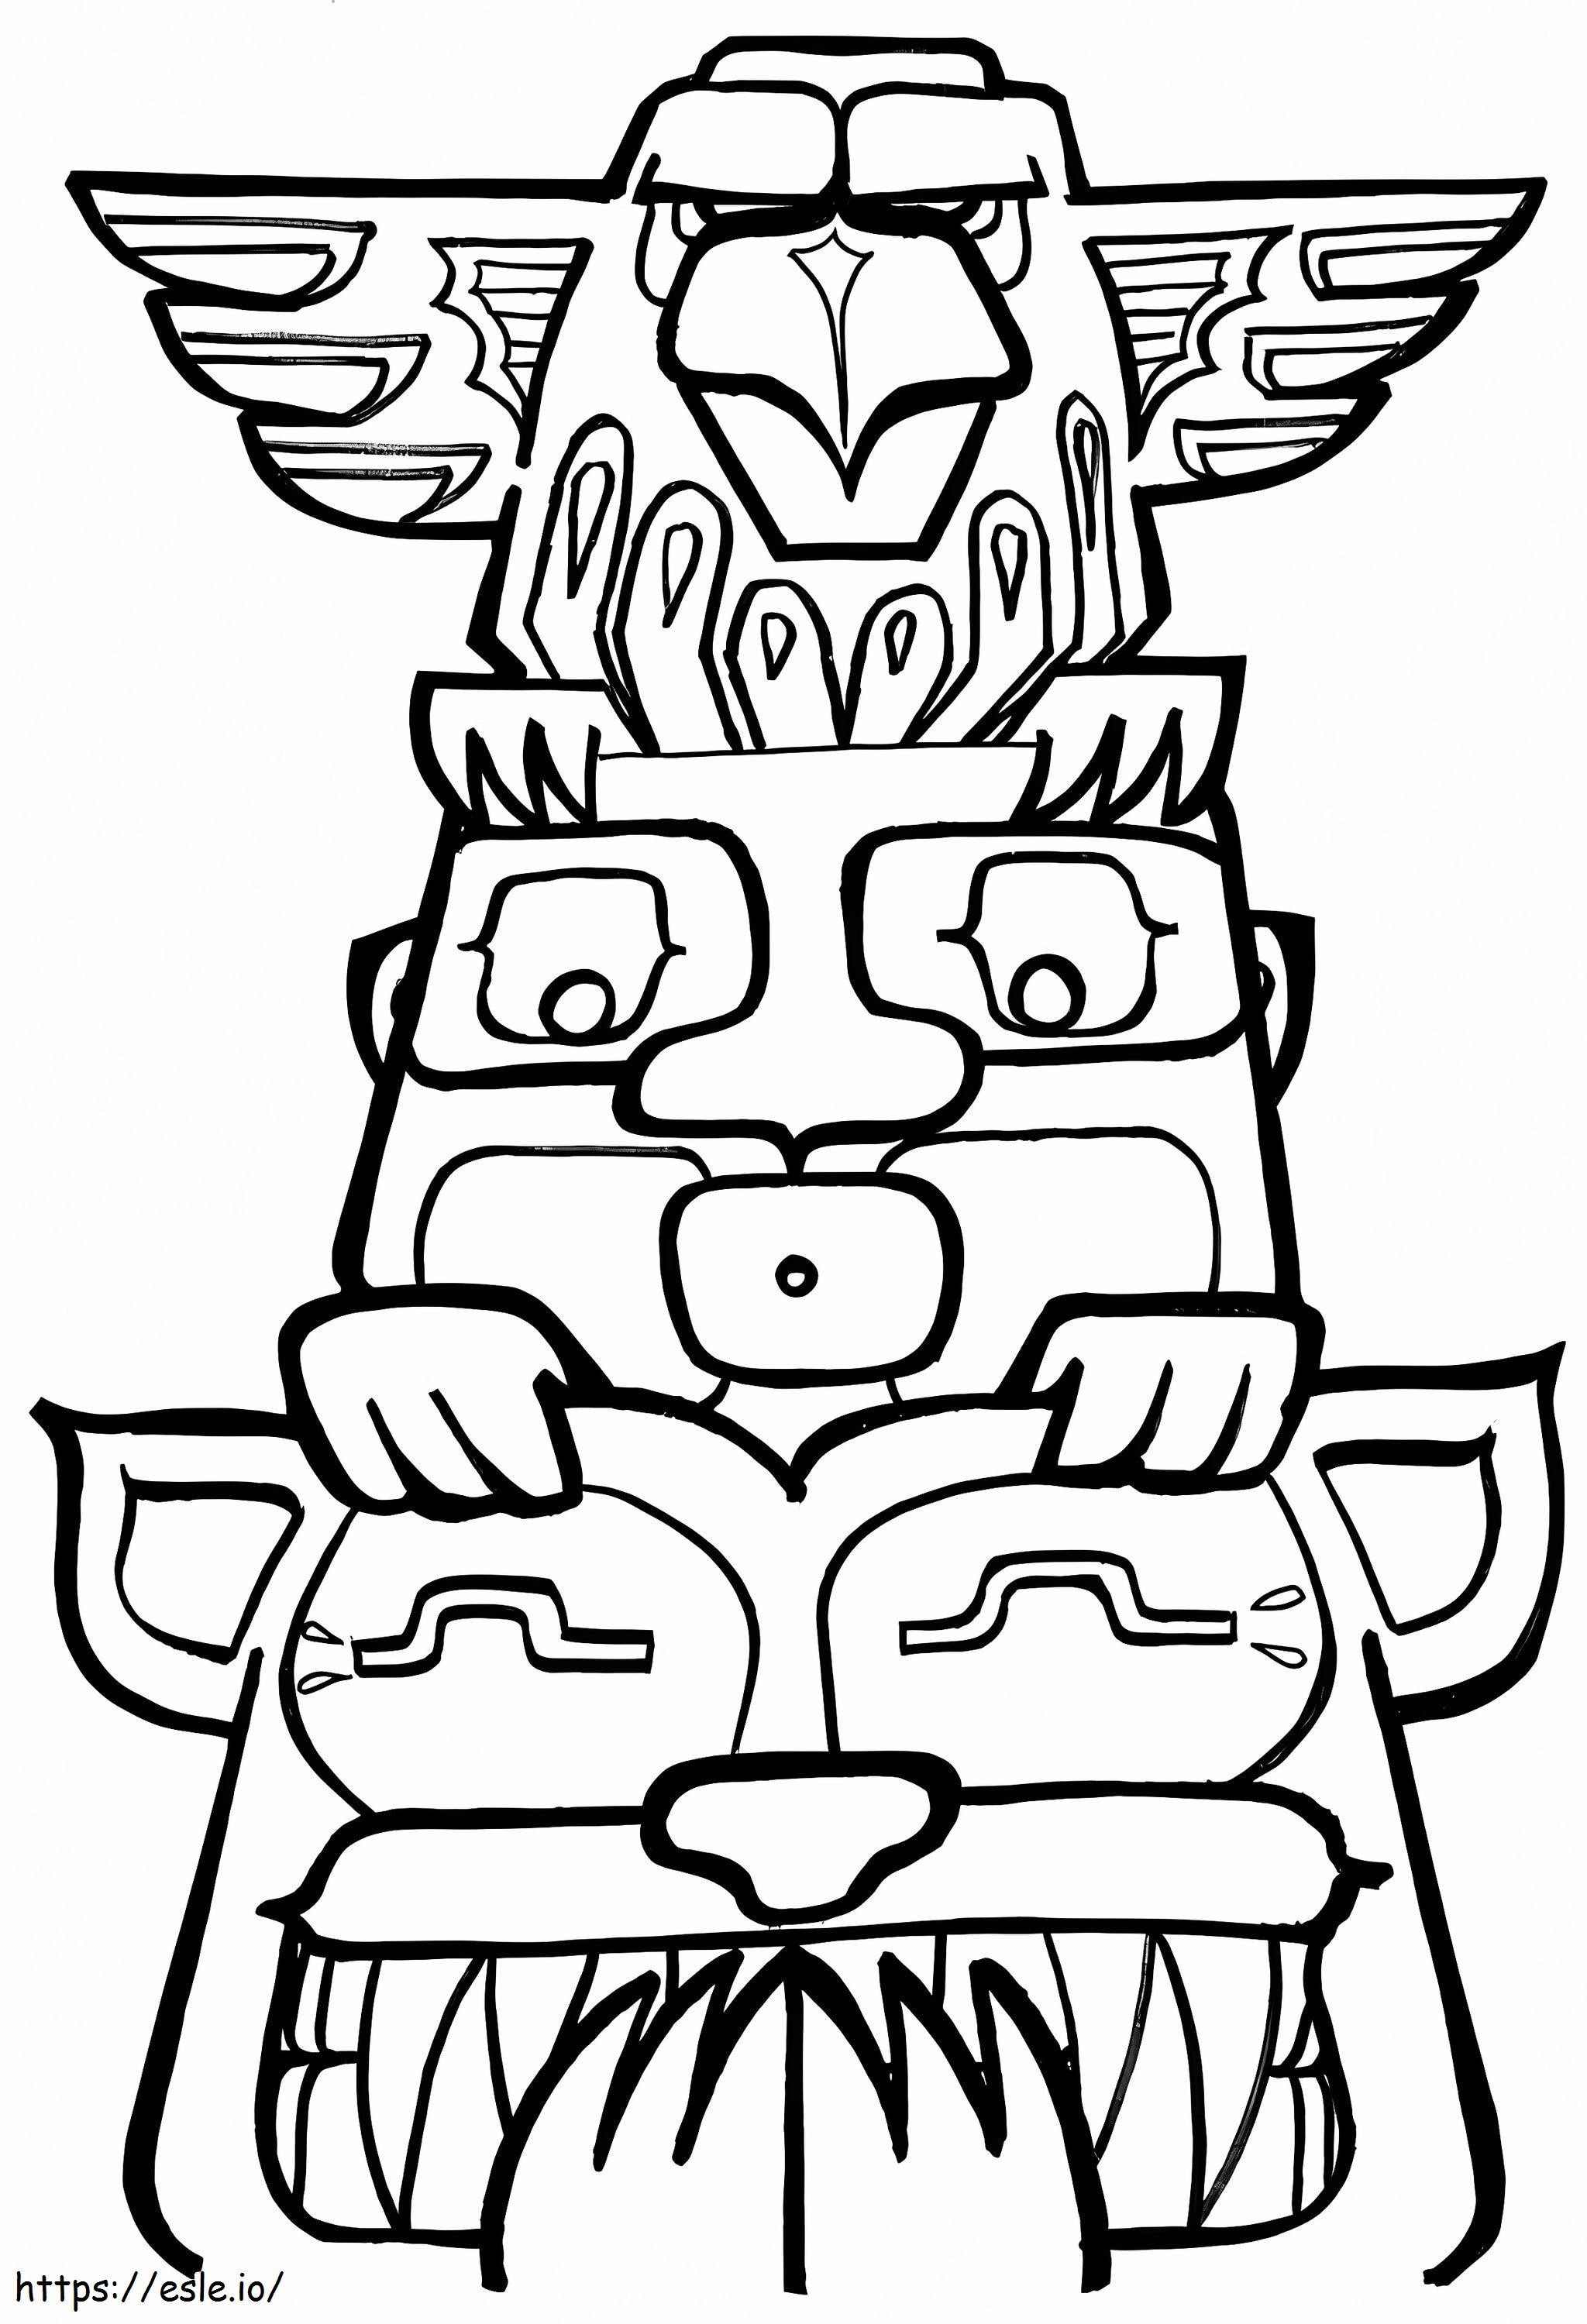 Ward Field 15 coloring page